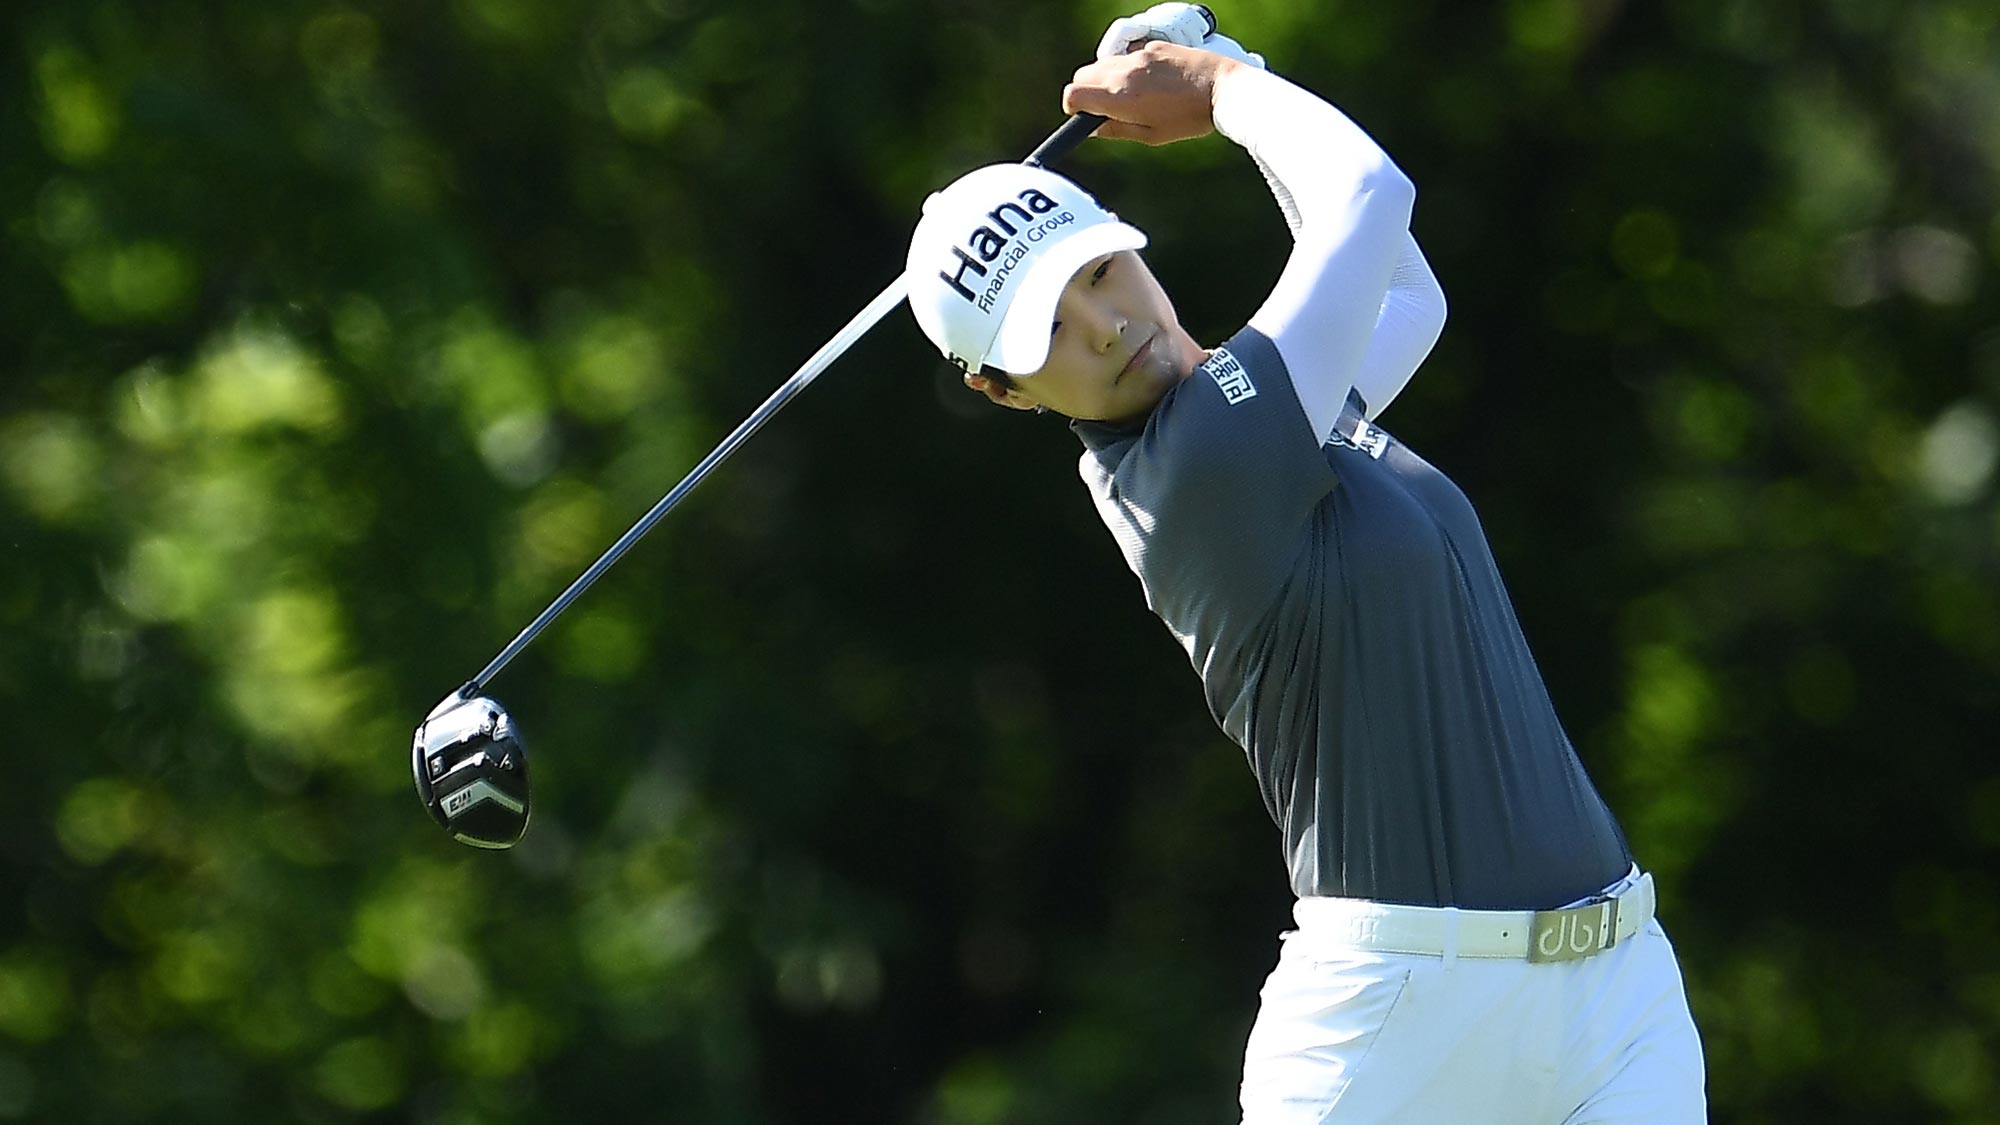 Sung Hyun Park of Korea hits her tee shot on the 11th hole during the second round of the KPMG Women's PGA Championship